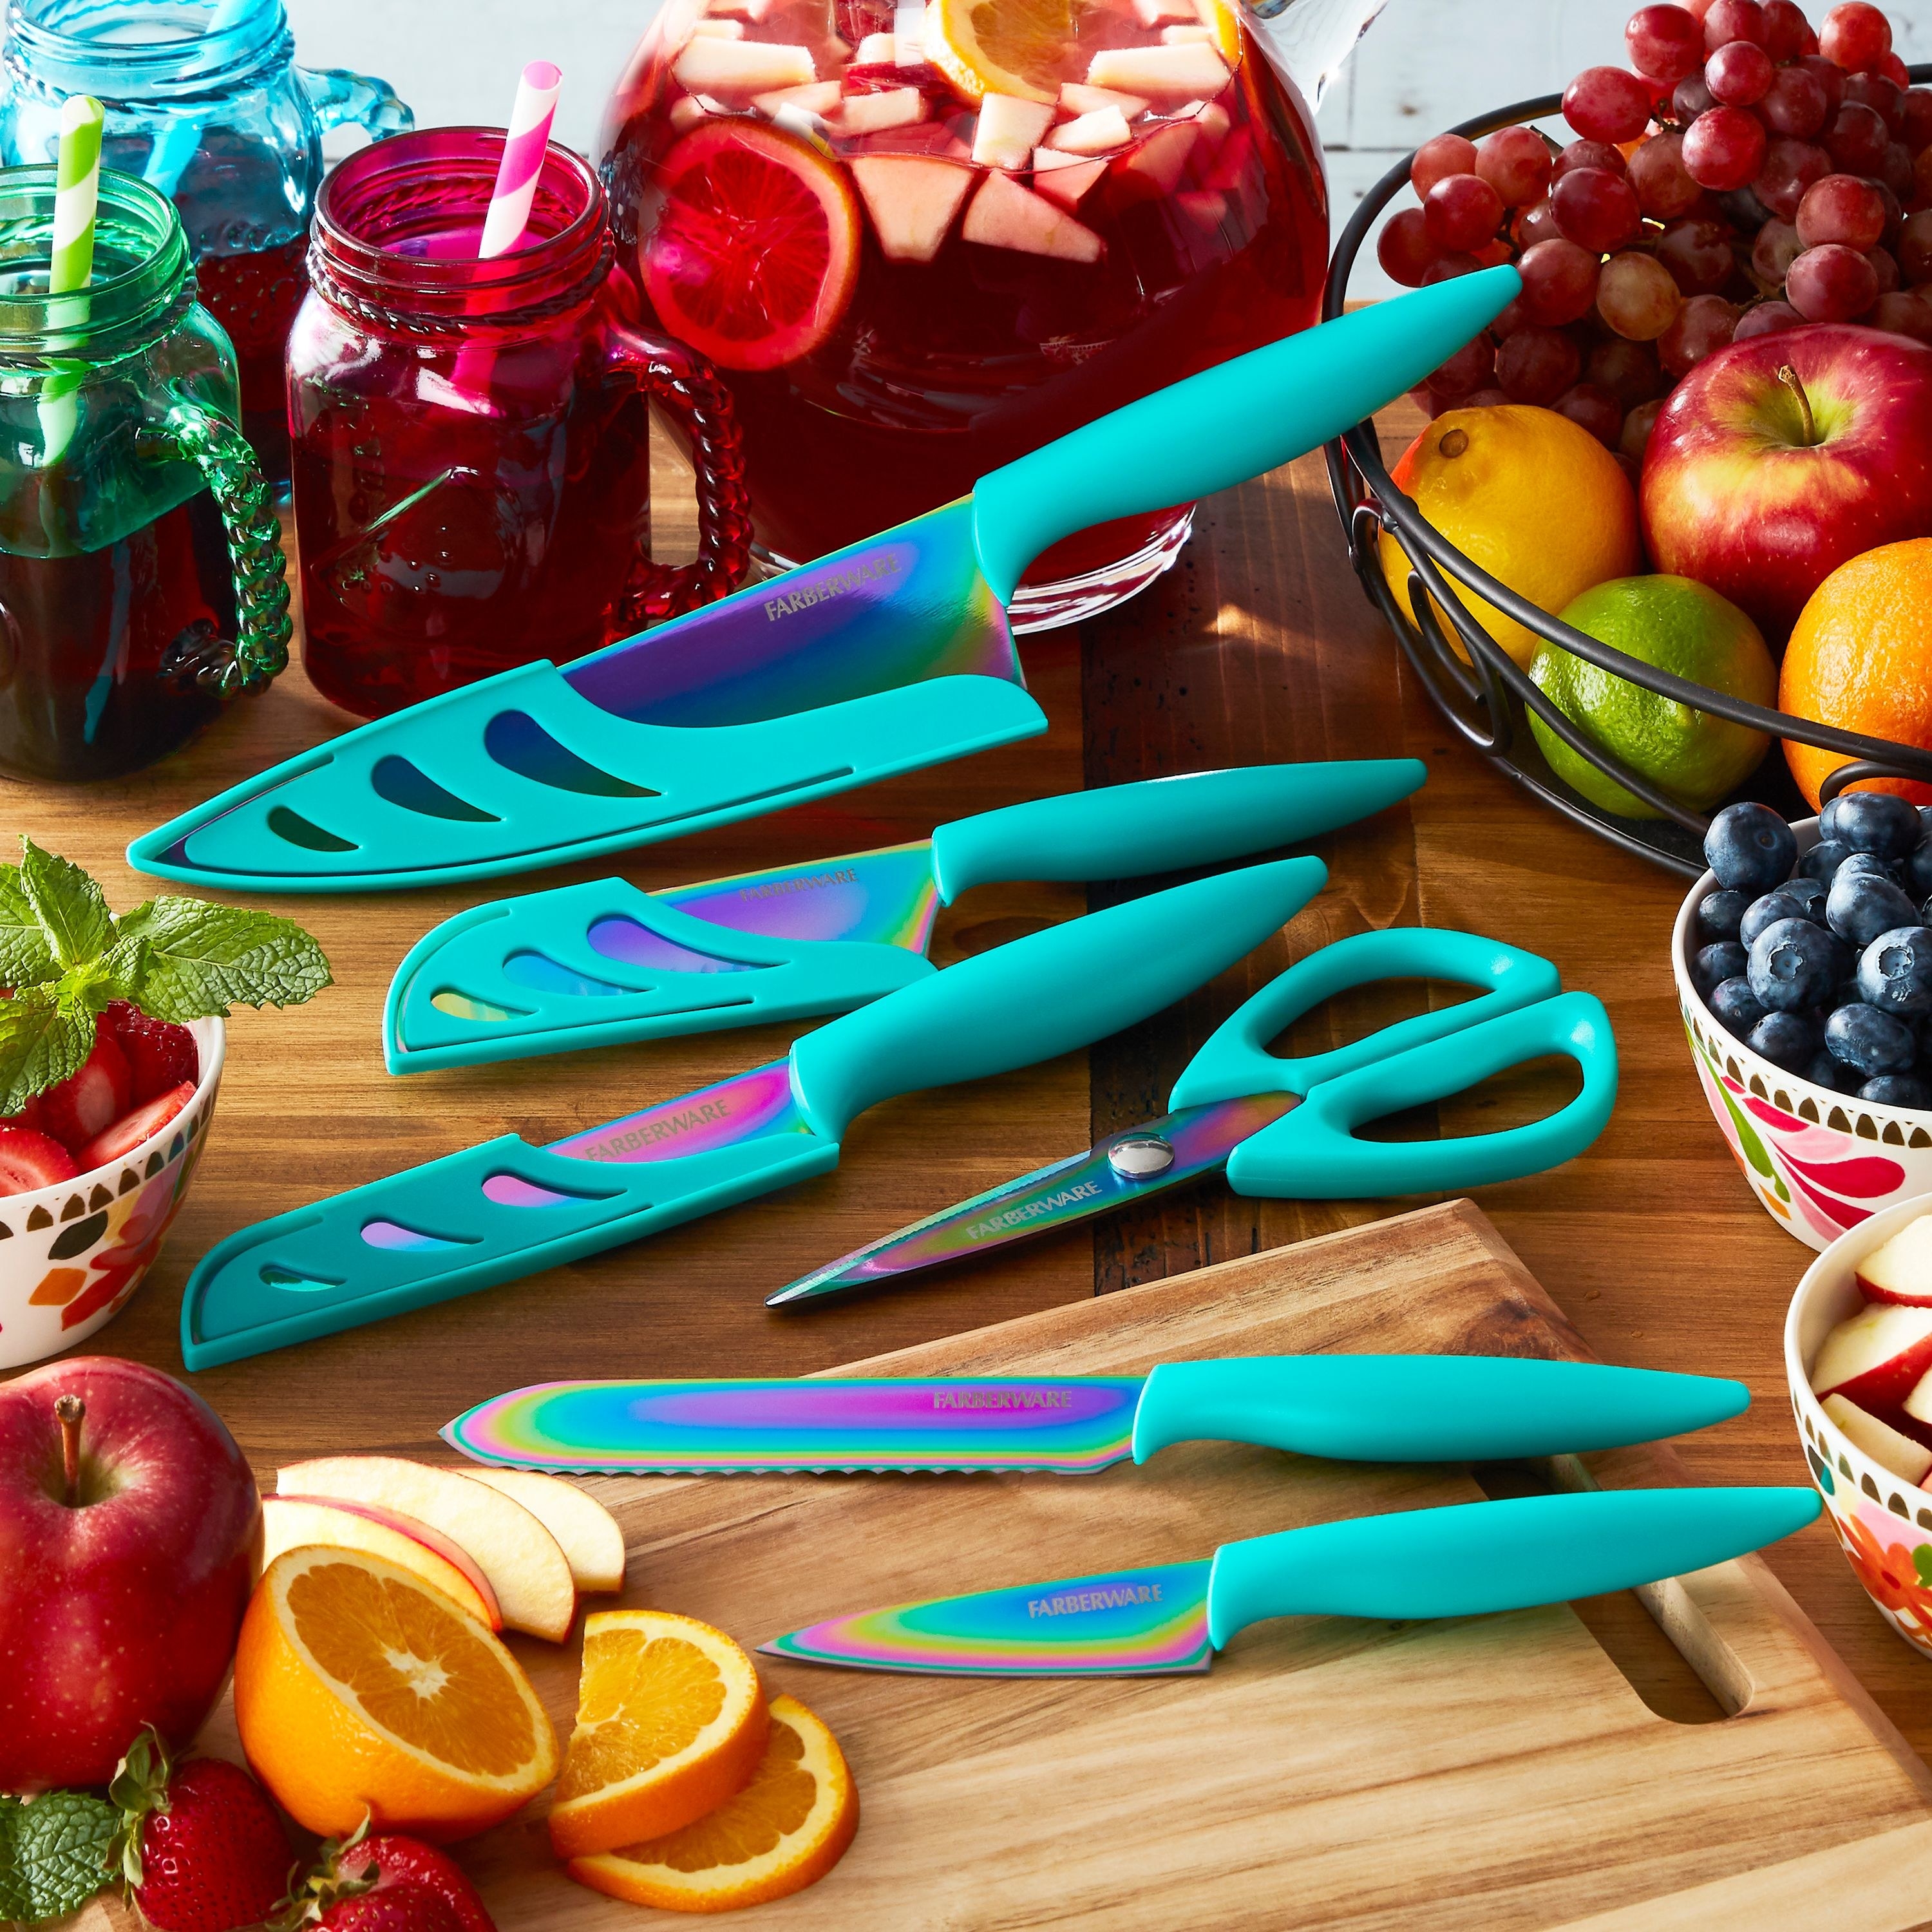 The knife set in teal with blade covers